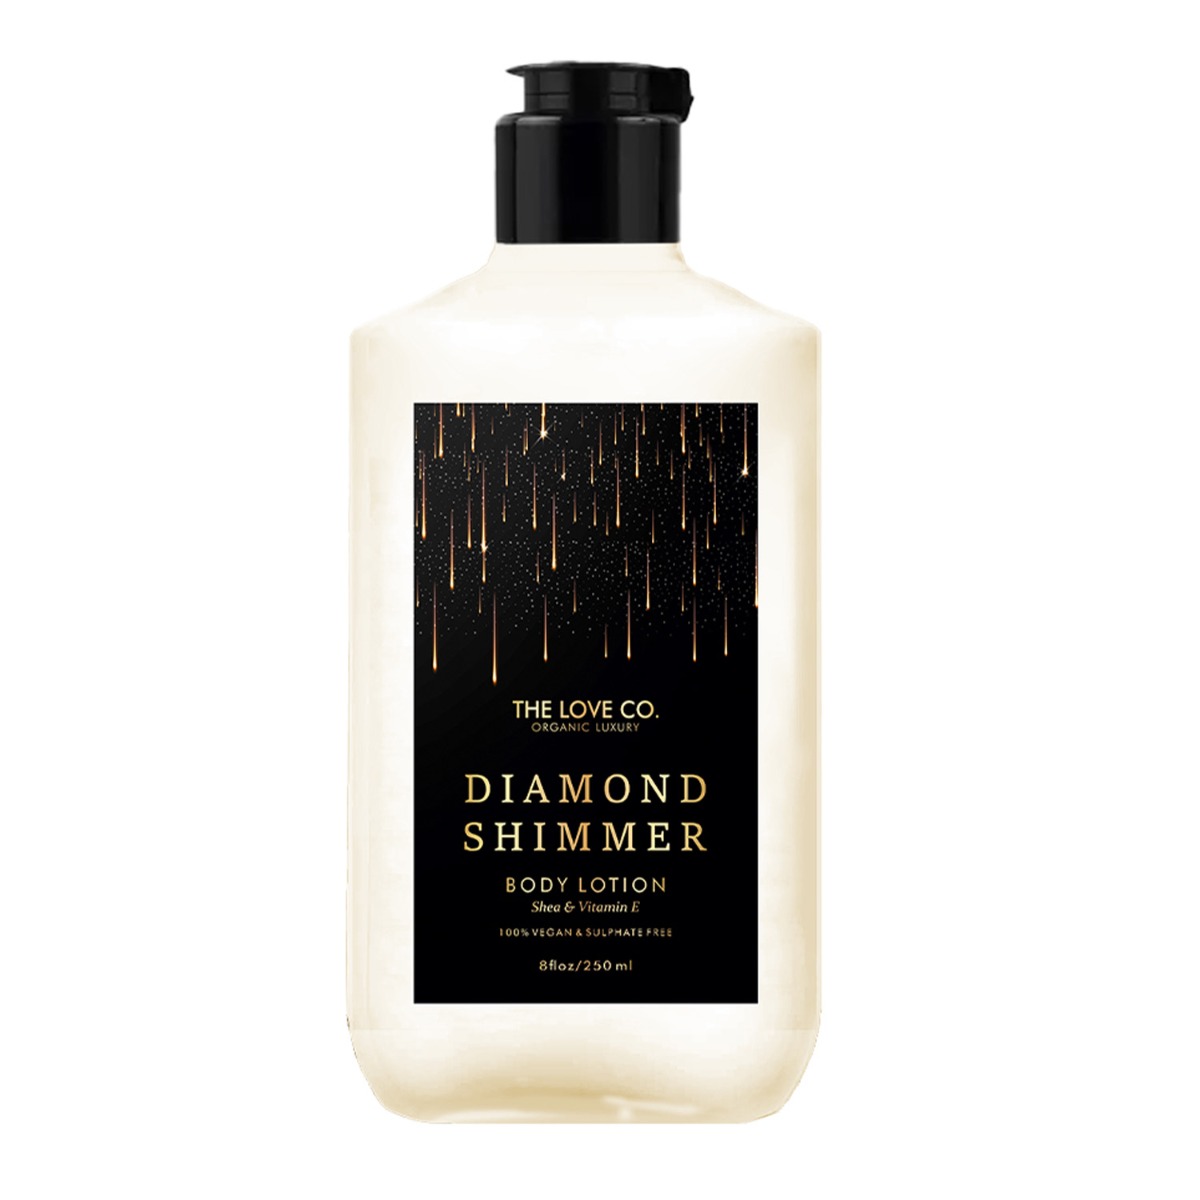 The Love Co. Diamond Shimmer Body Lotion With Shea Butter & Vitamin E Extracts For Dry Skin, 250ml